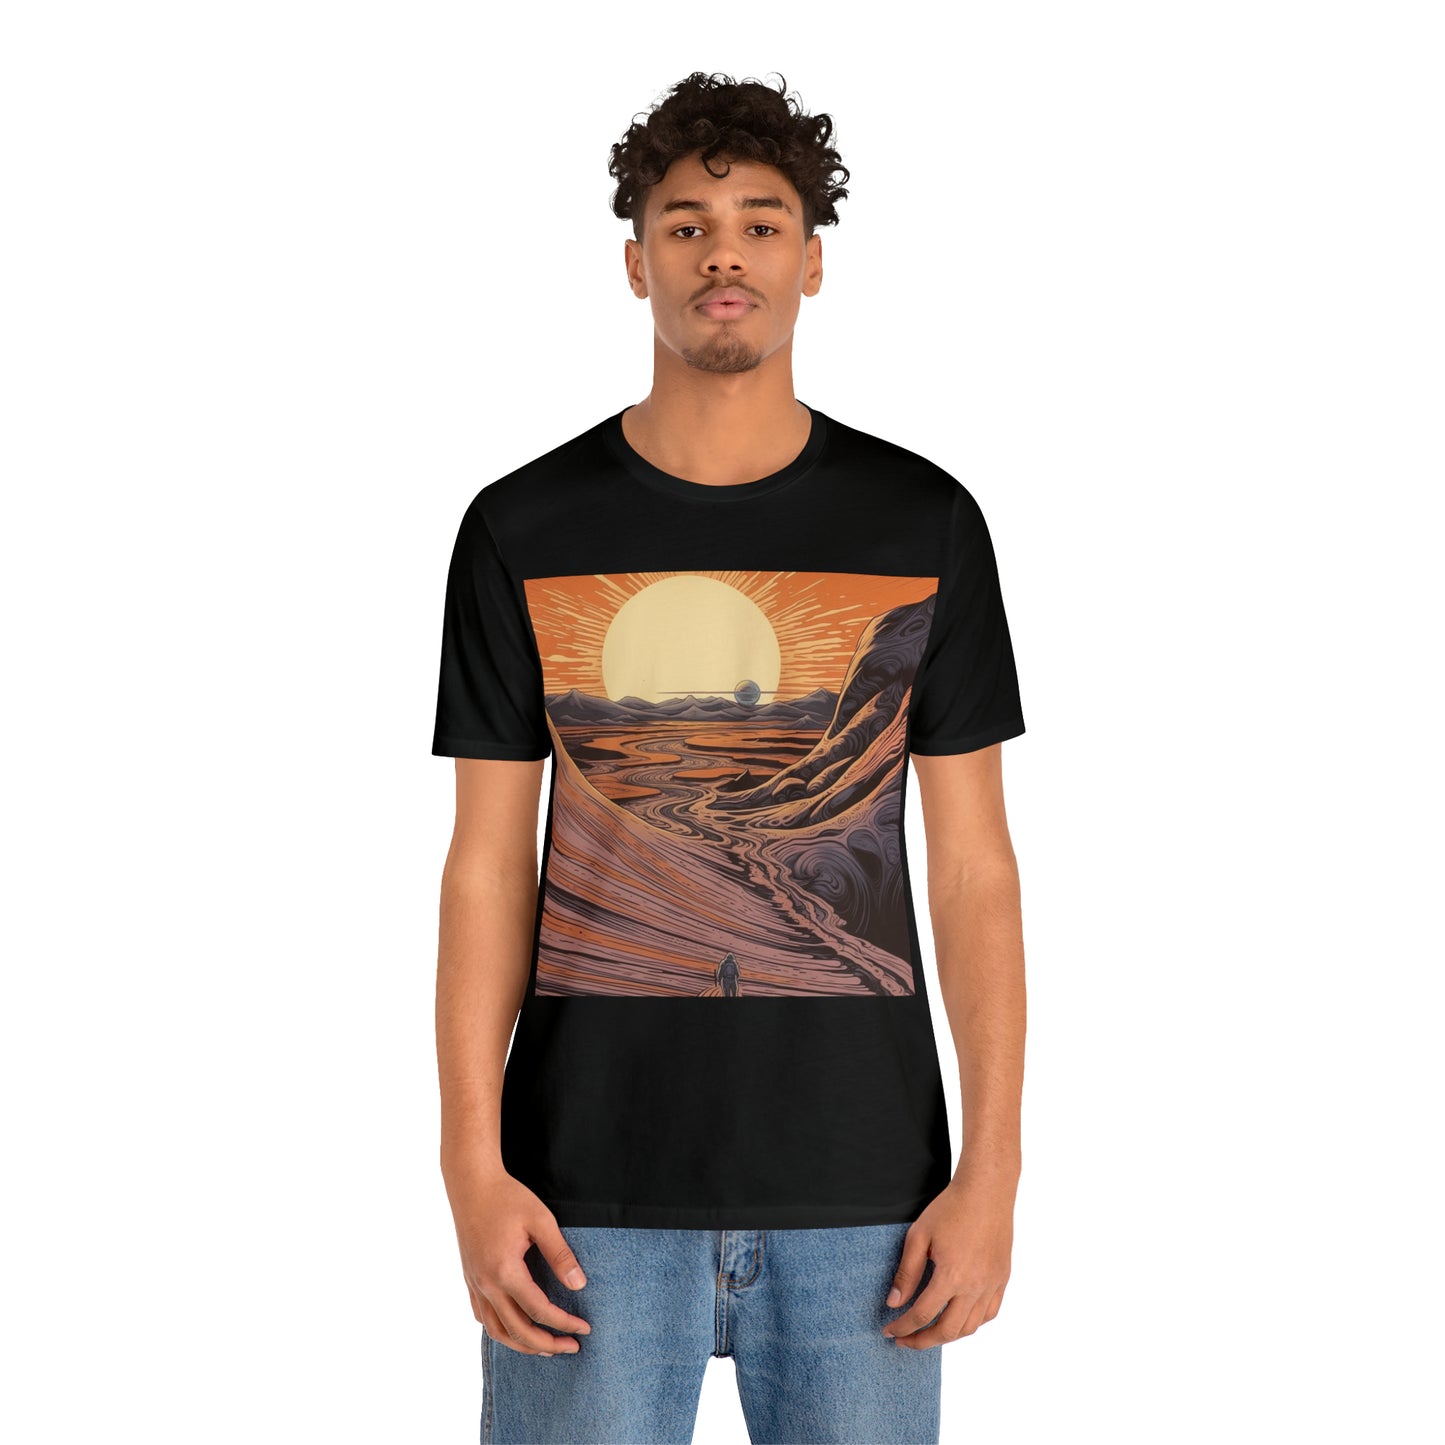 black-quest-thread-tee-shirt-with-large-sunrise-over-dunes-on-center-of-shirt